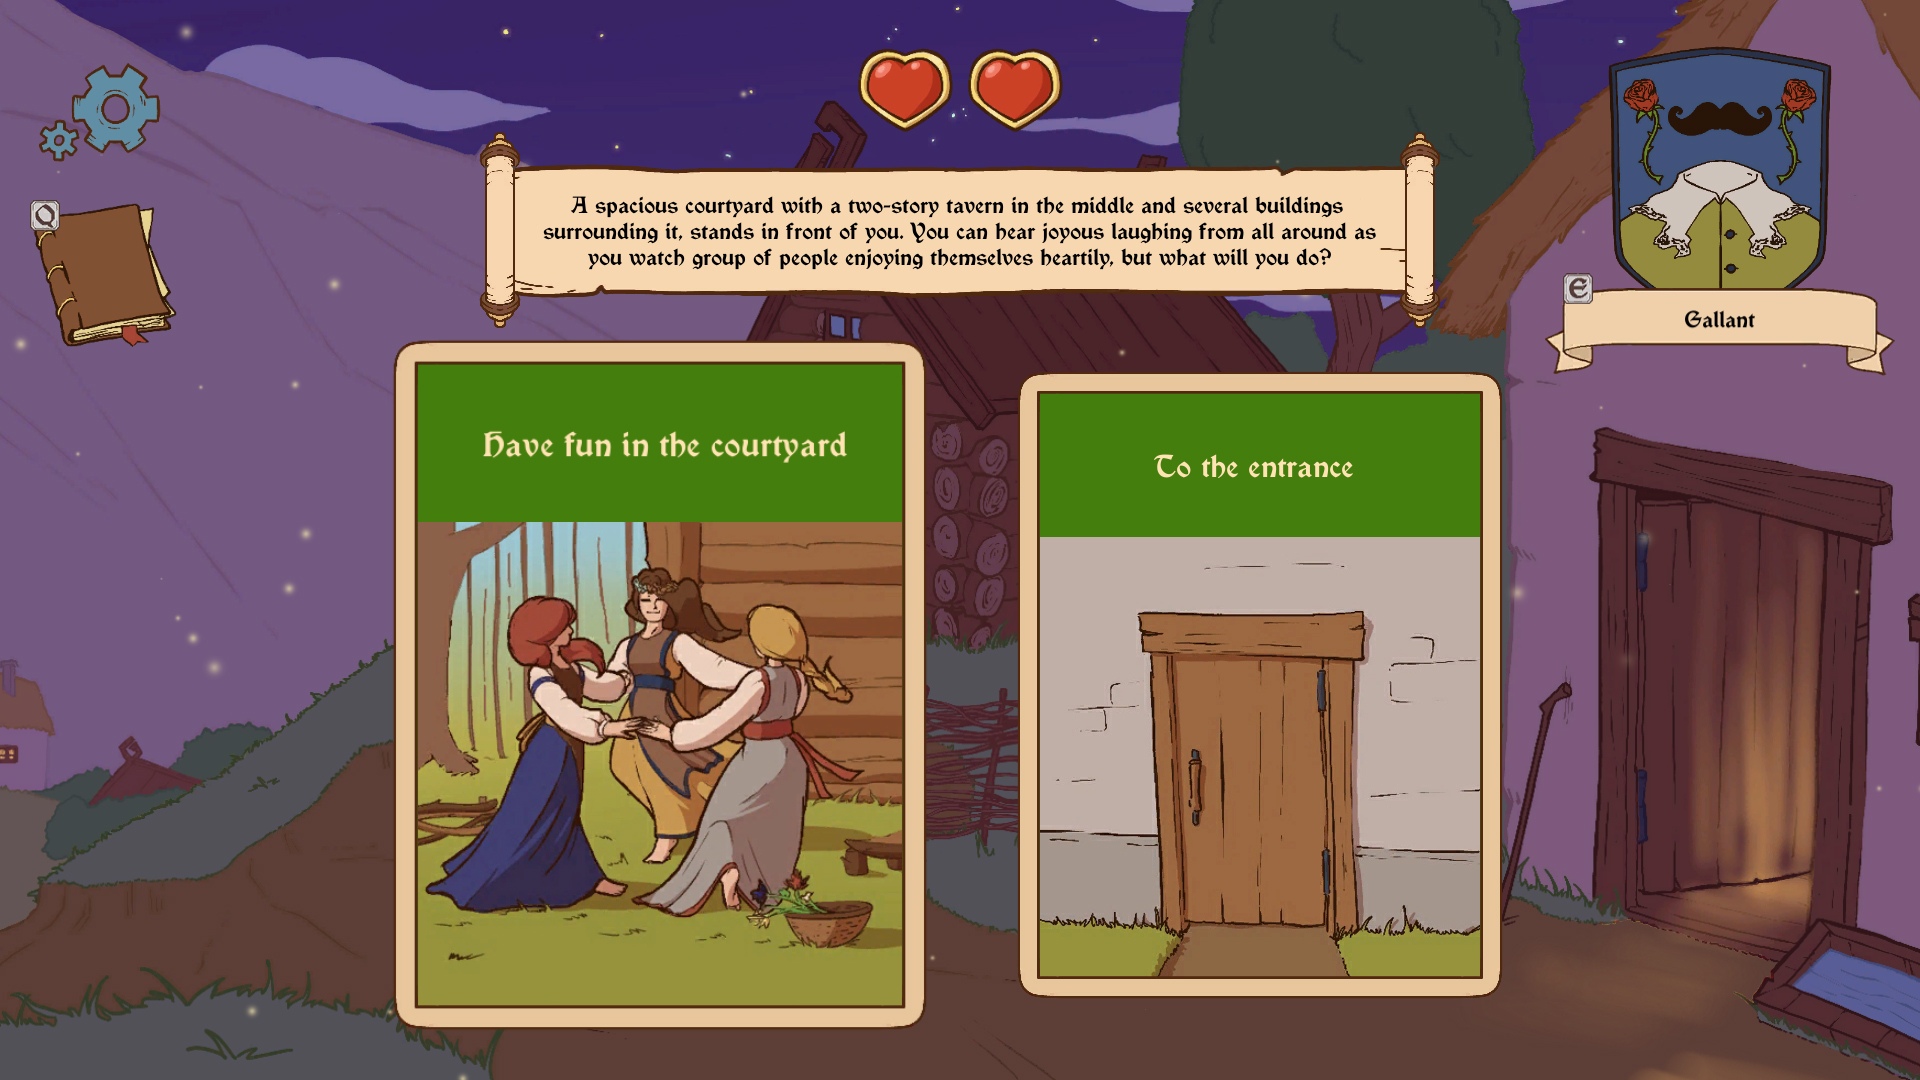 Baixar Choice of Life: Middle Ages 2 para Android grátis.